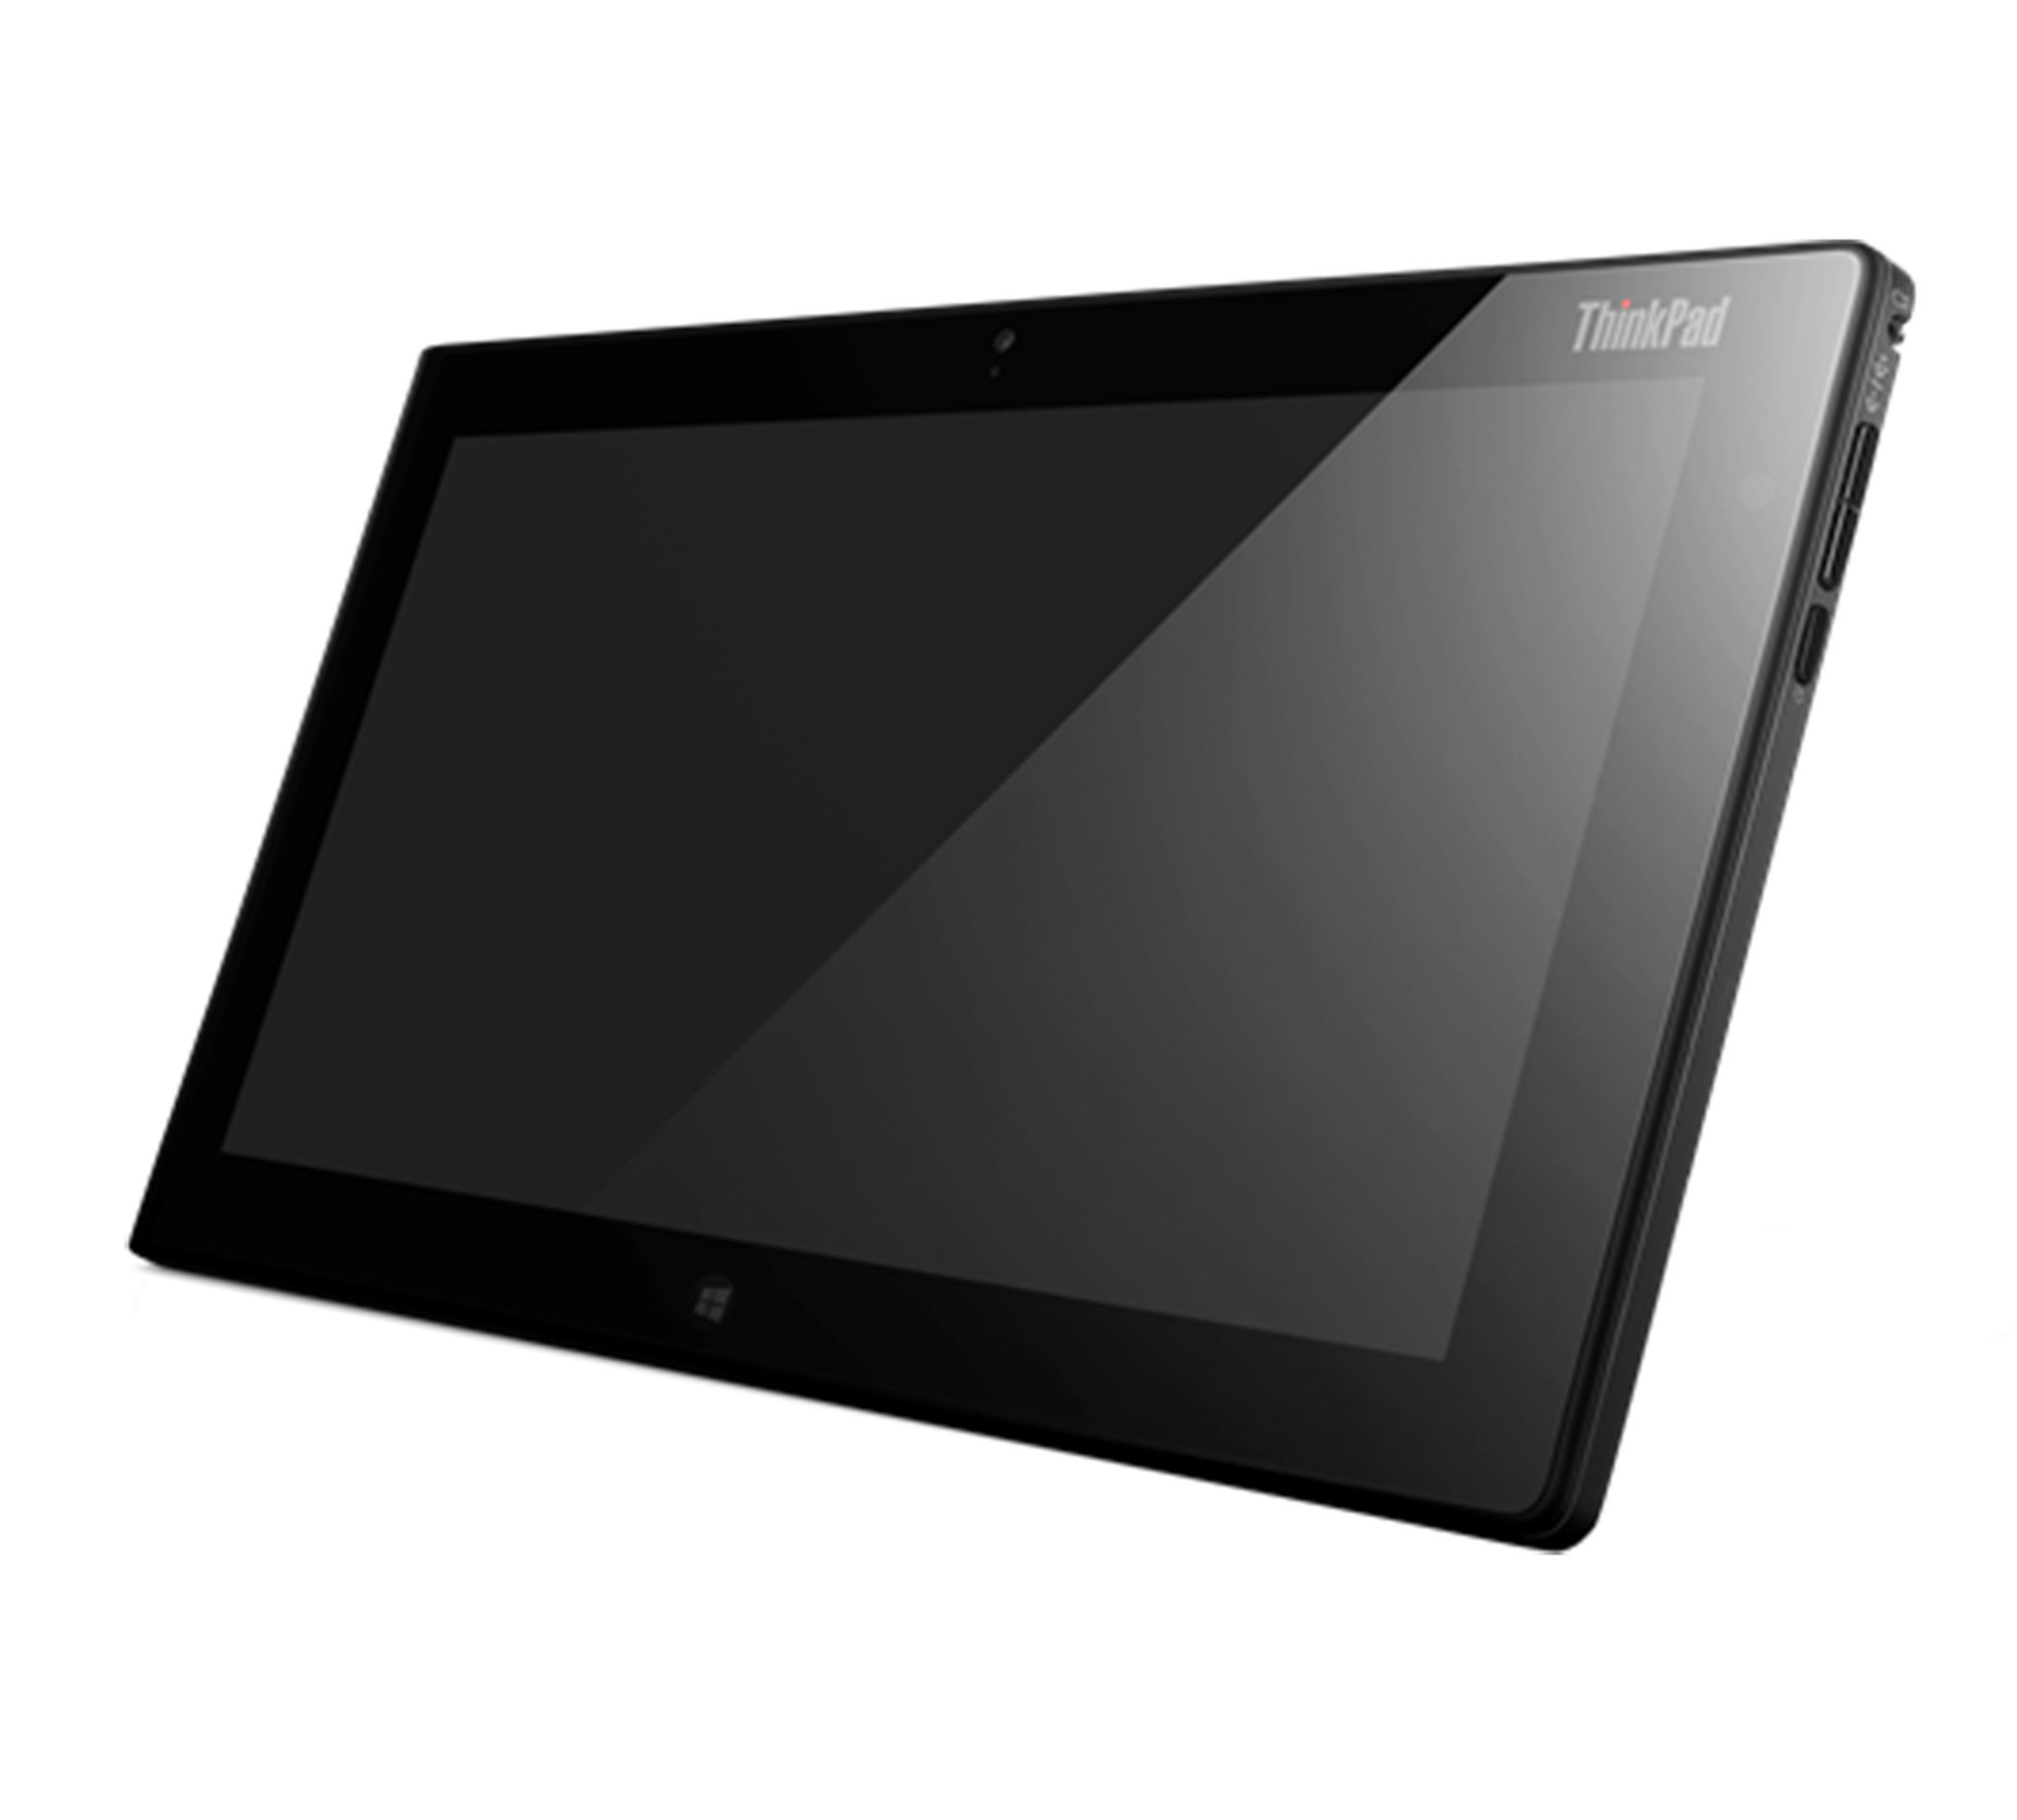 Lenovo ThinkPad Tablet 2 press pictures